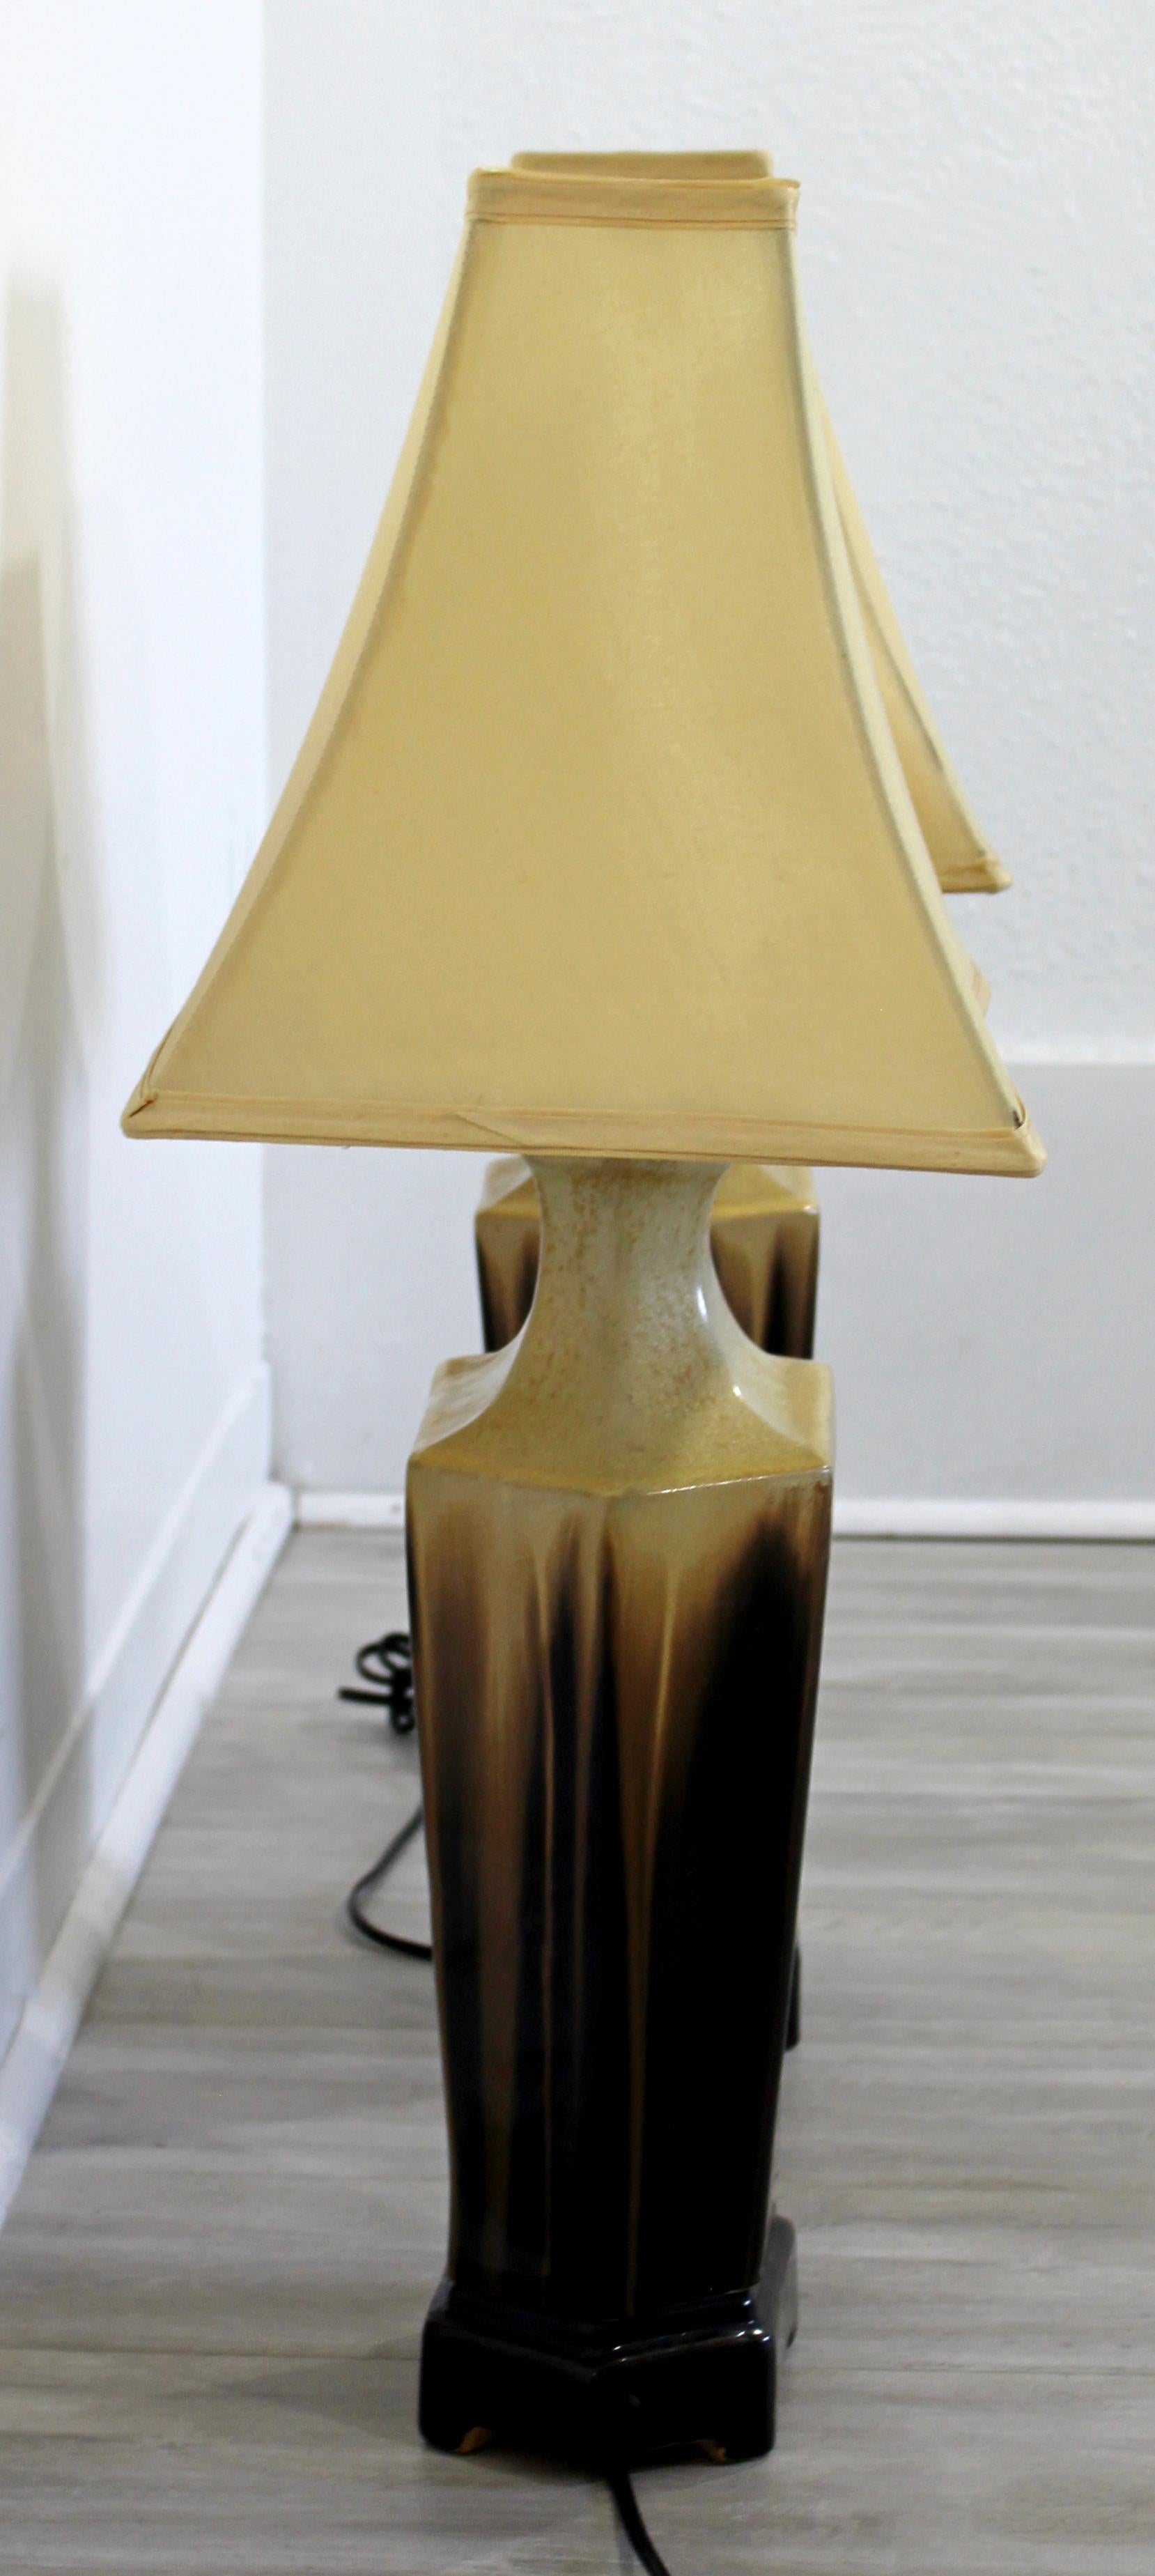 American Mid-Century Modern Pair of Brown Drip Glaze Ceramic Table Lamps, 1960s